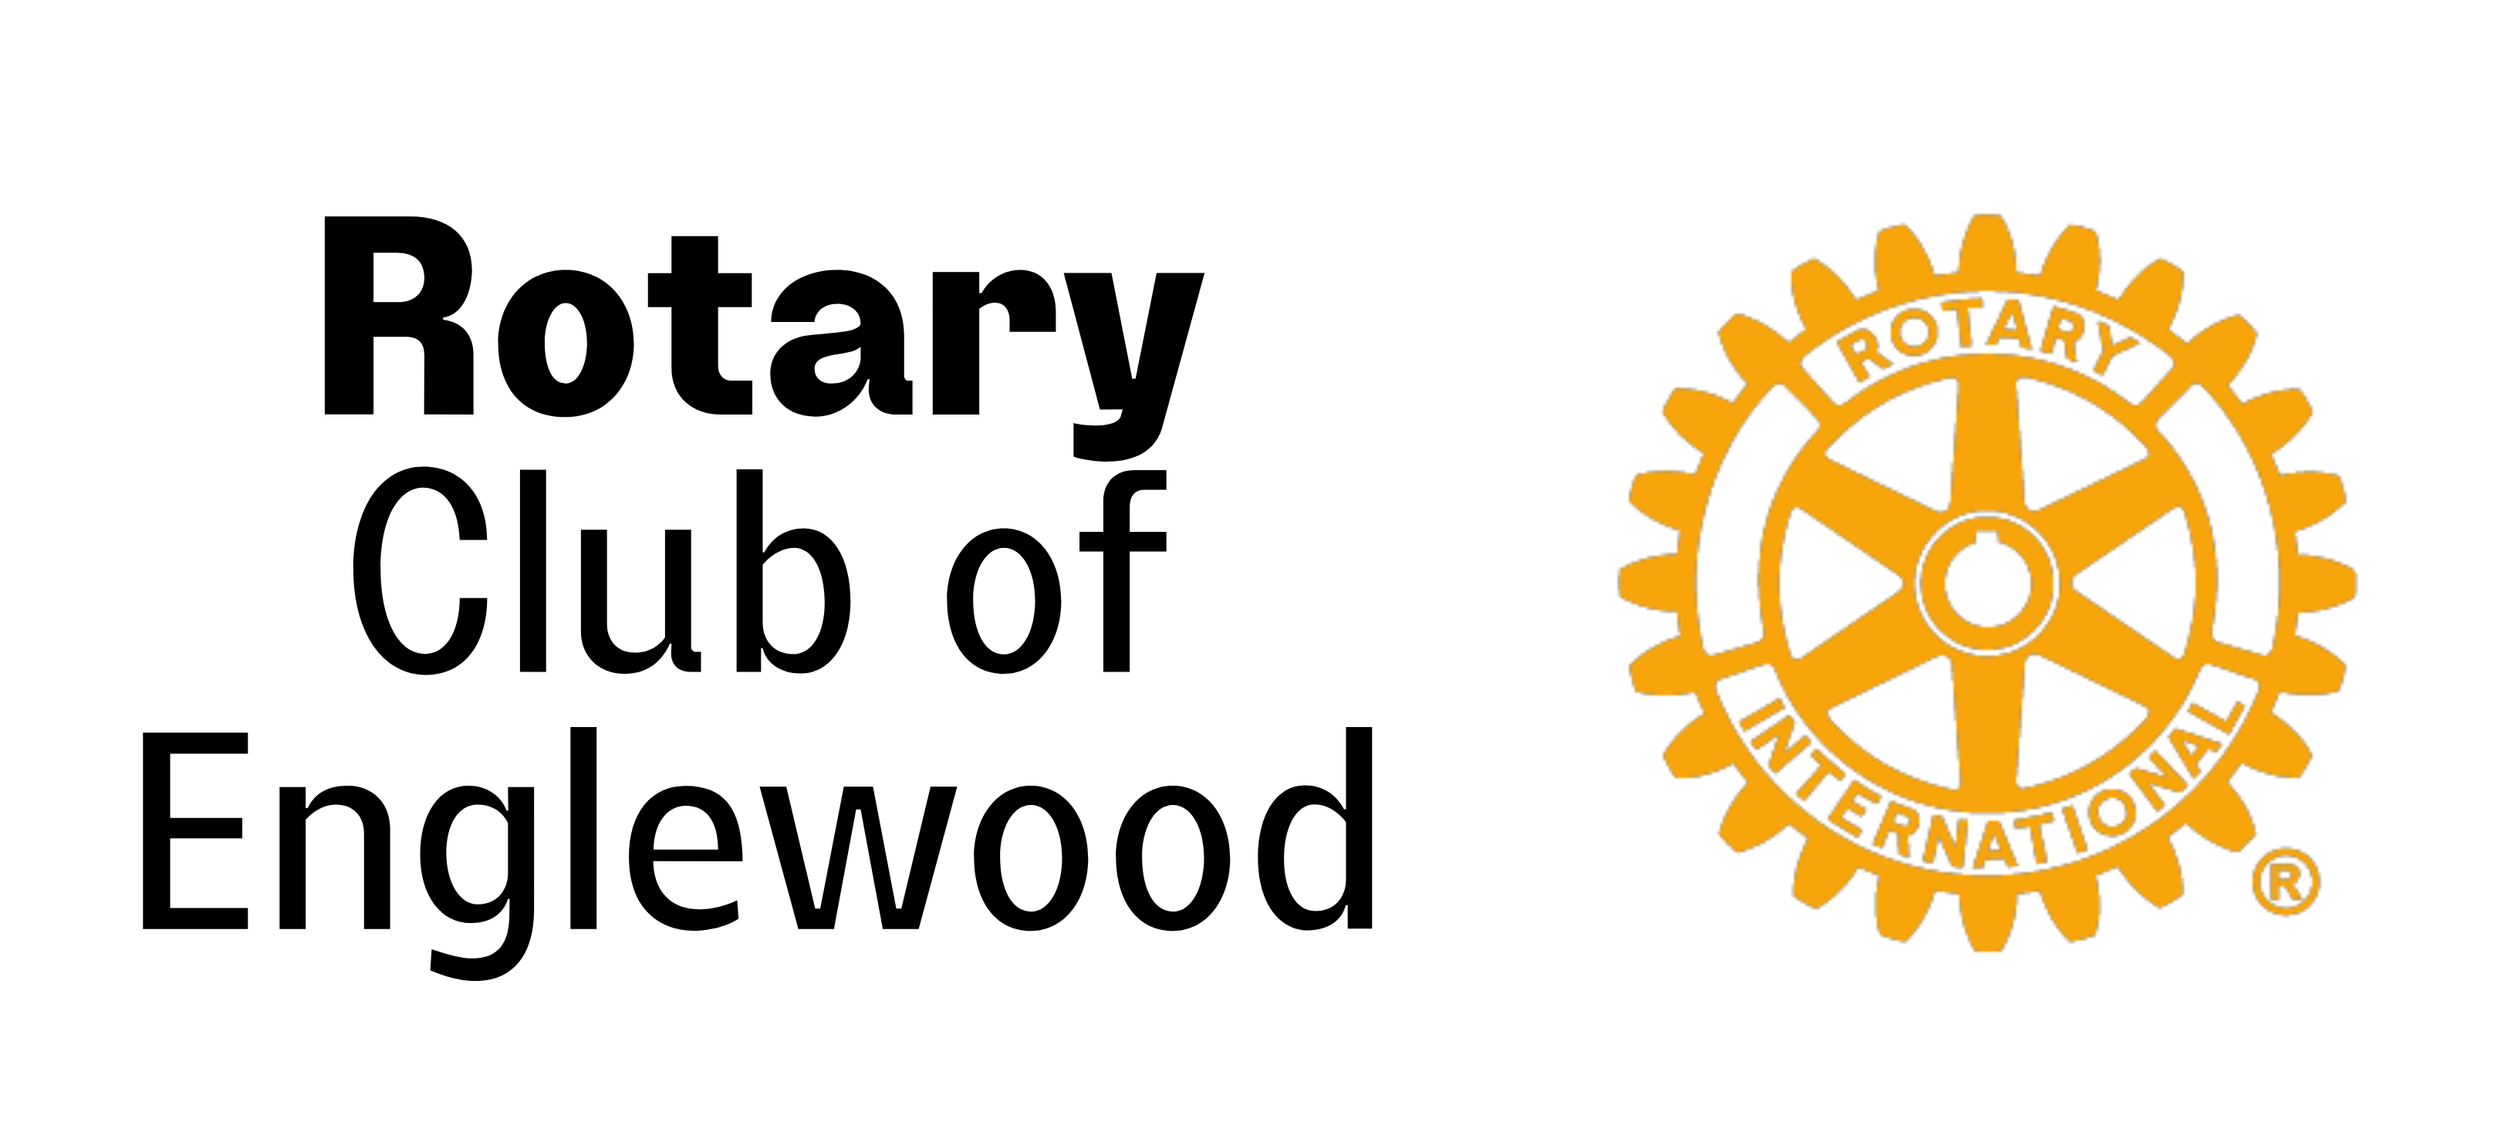 Copy of Rotary Club logo.png